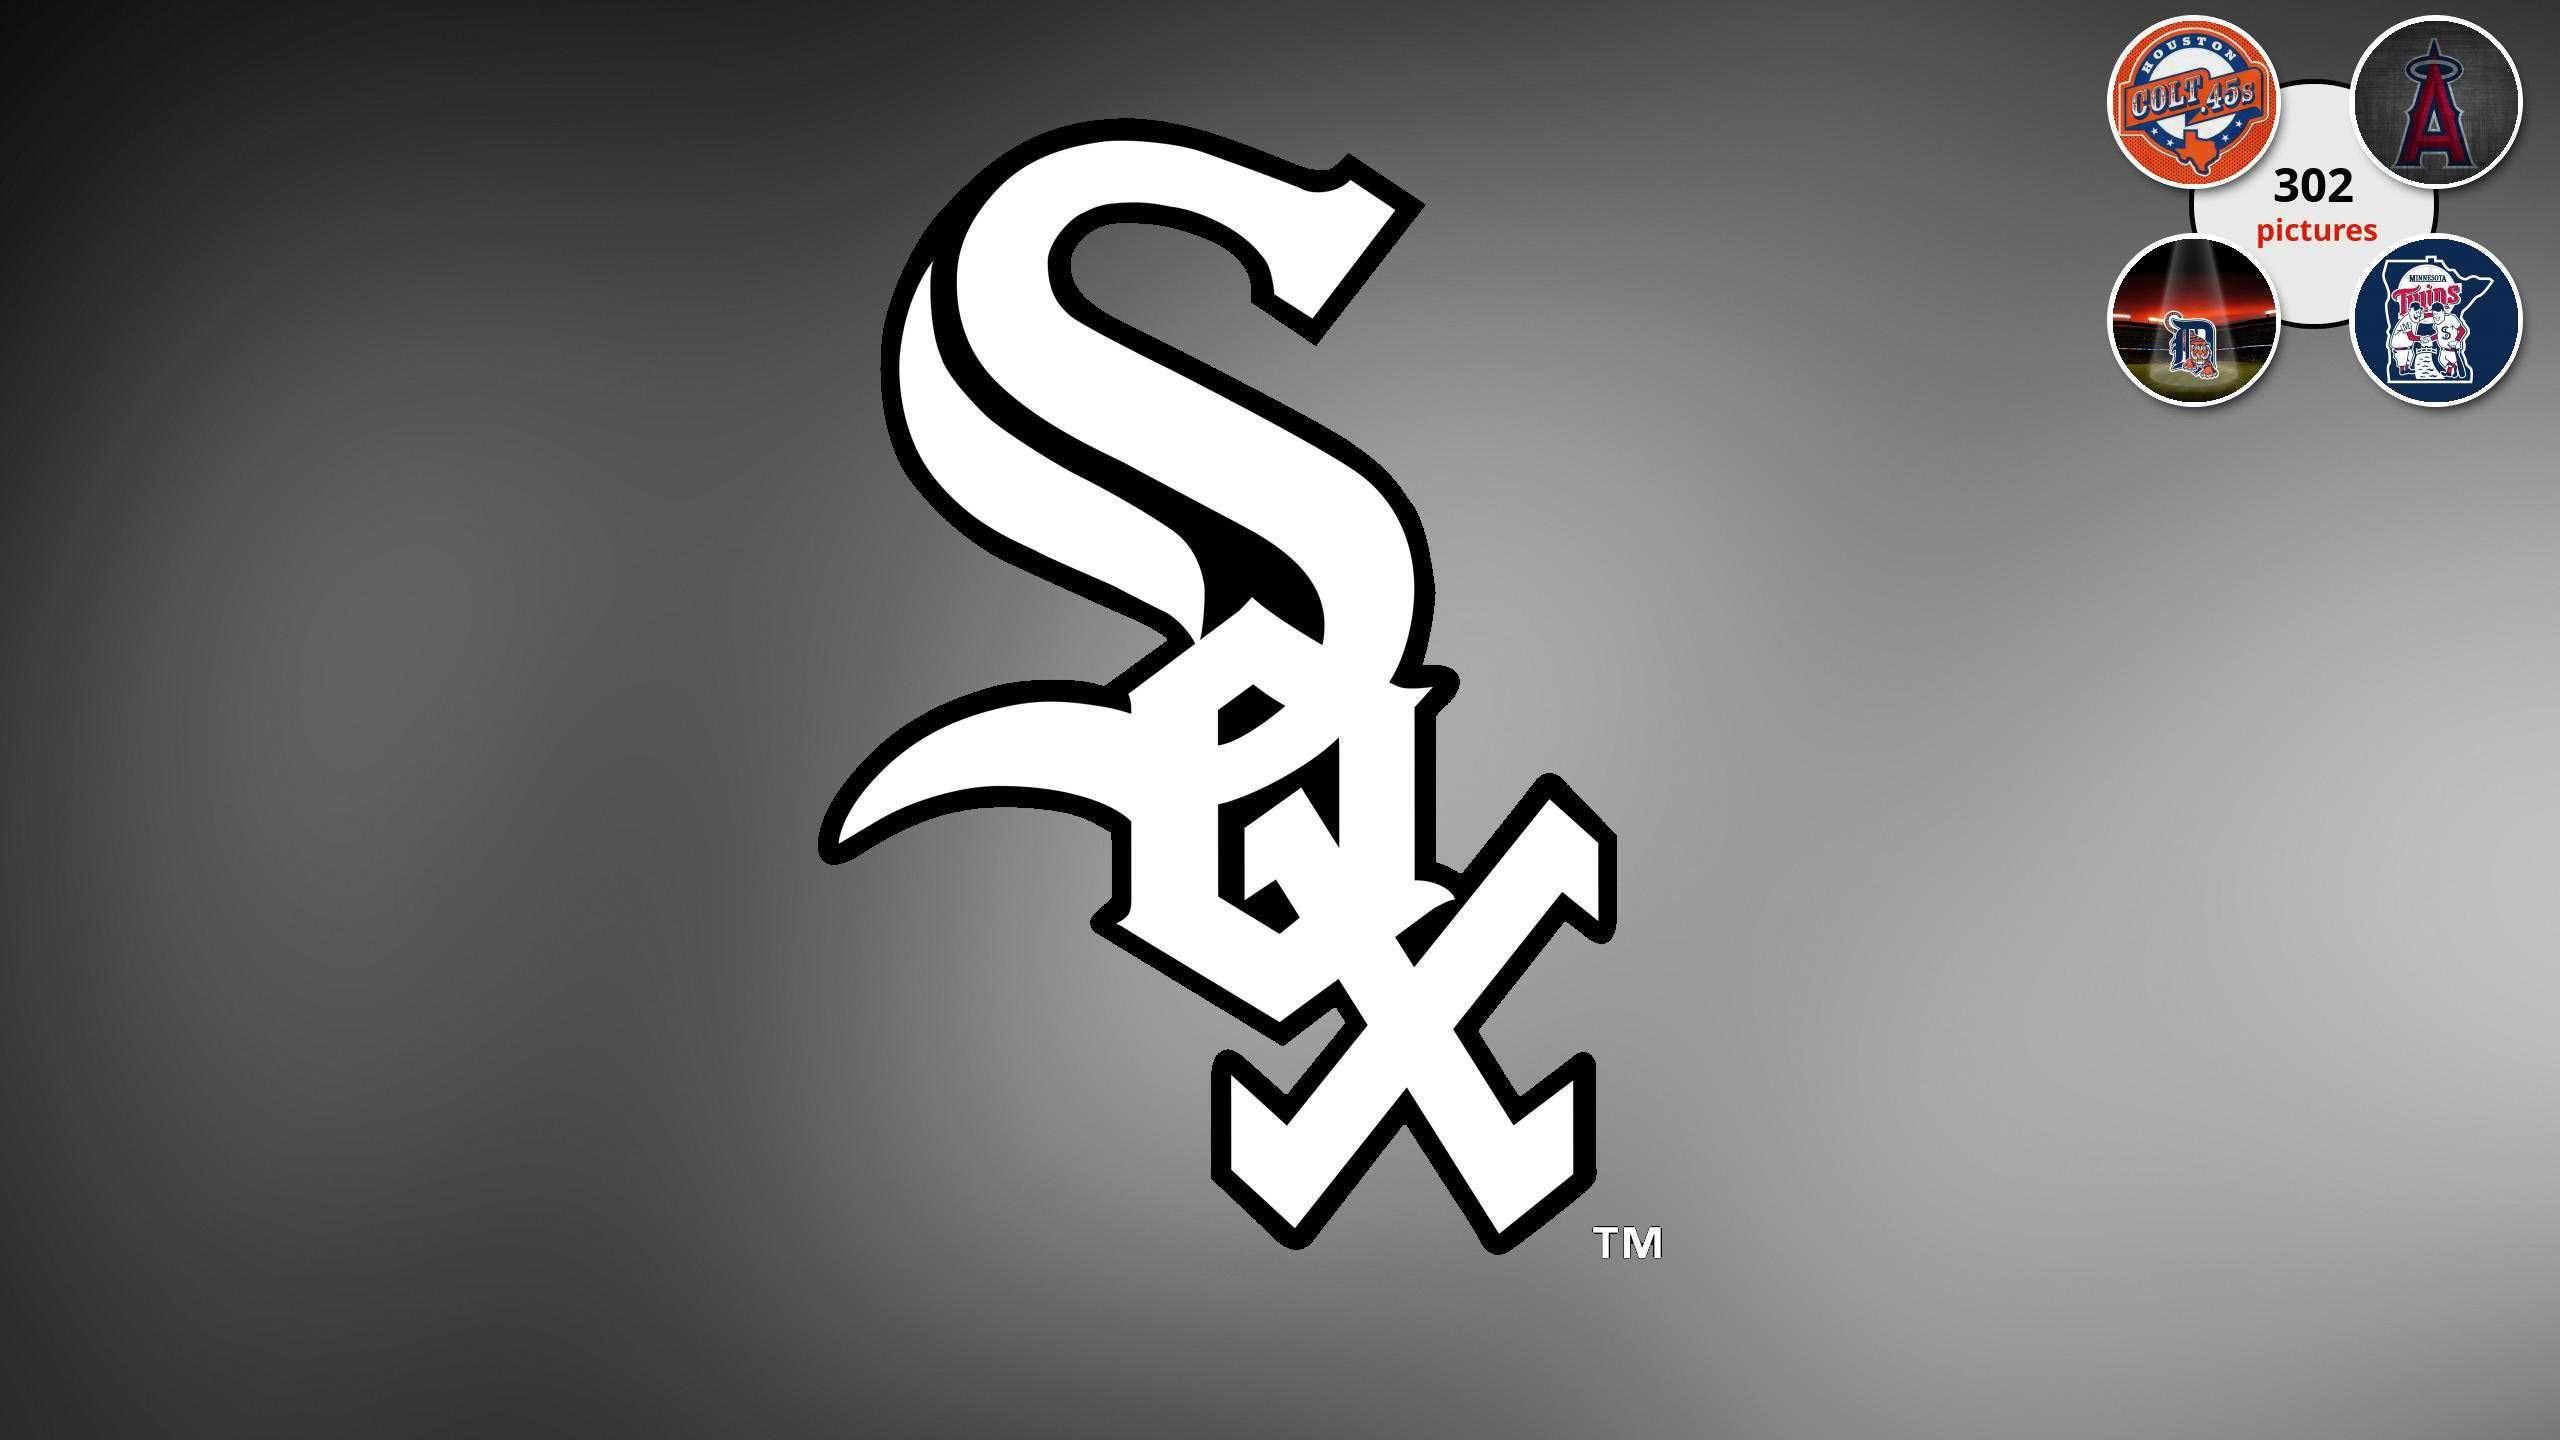 Chicago White Sox 2018 Wallpapers - Wallpaper Cave